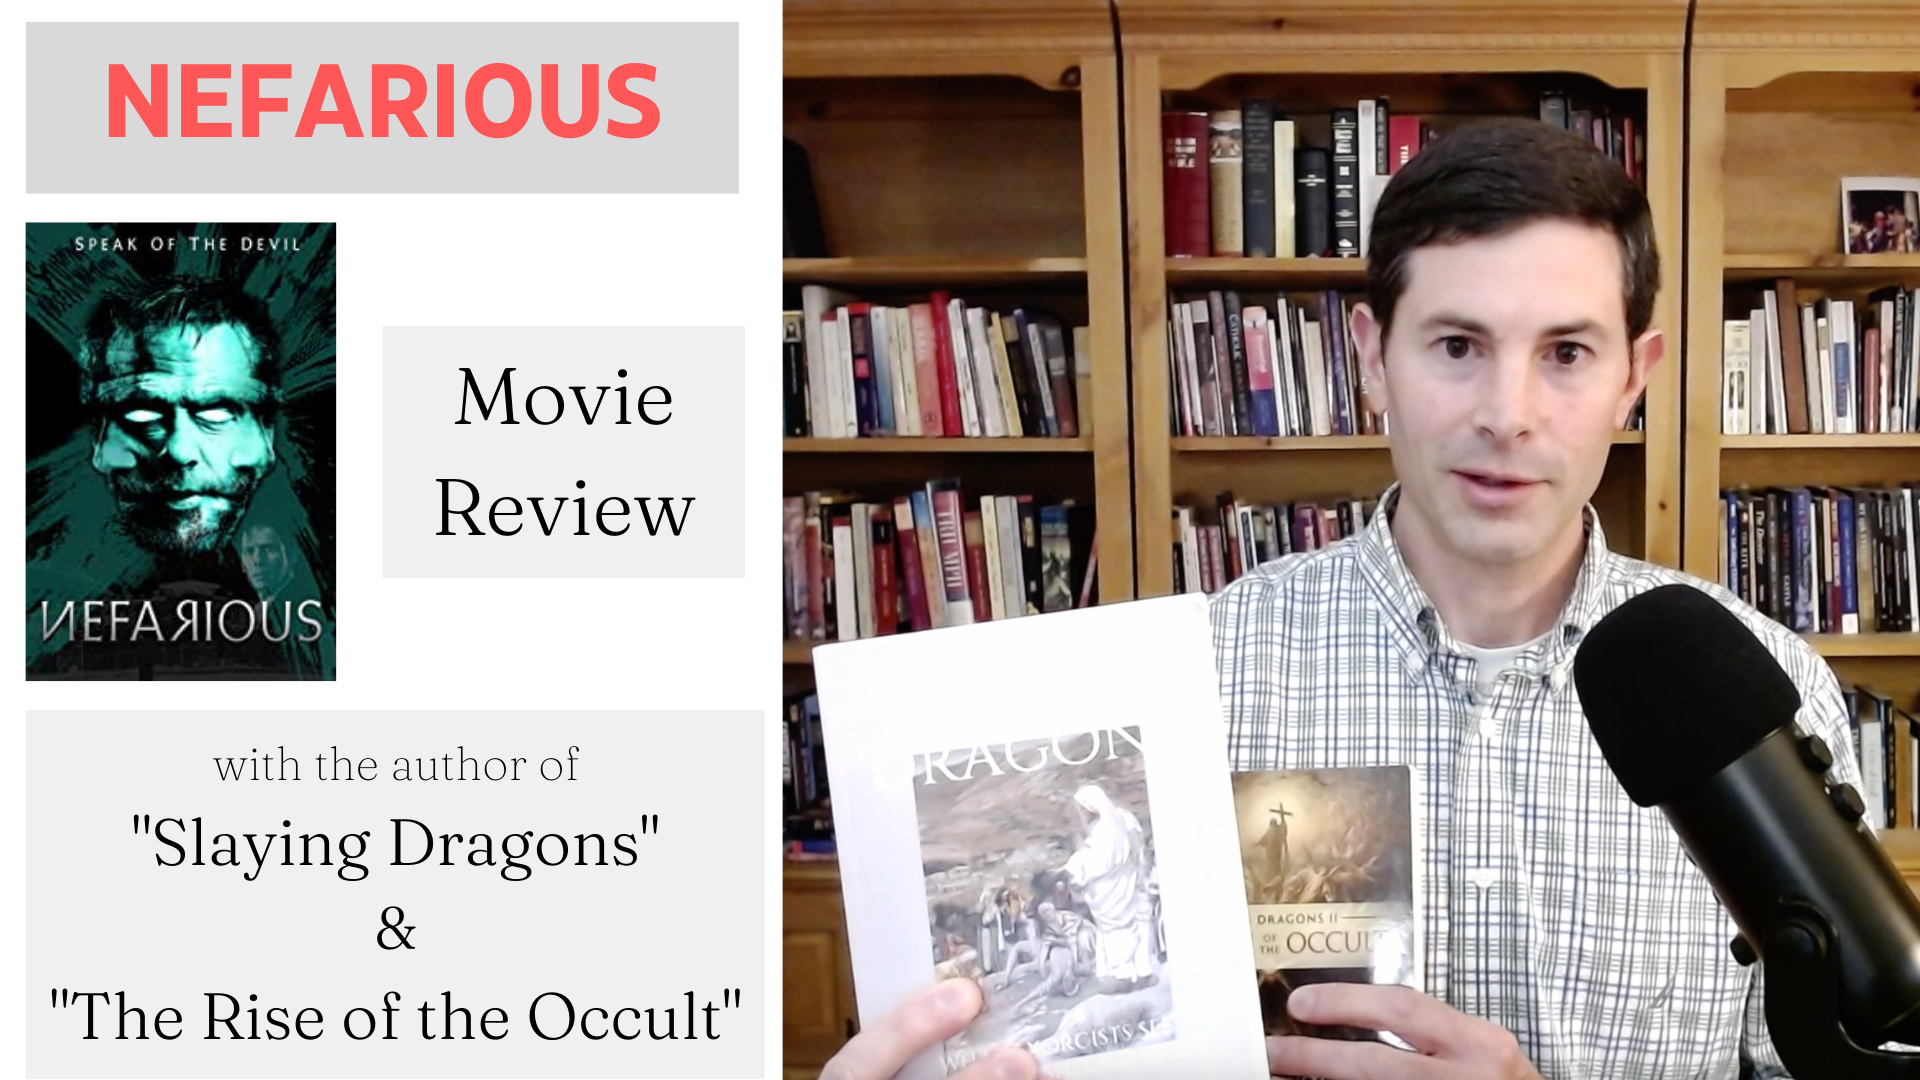 Nefarious - Movie Review by the author of "Slaying Dragons"